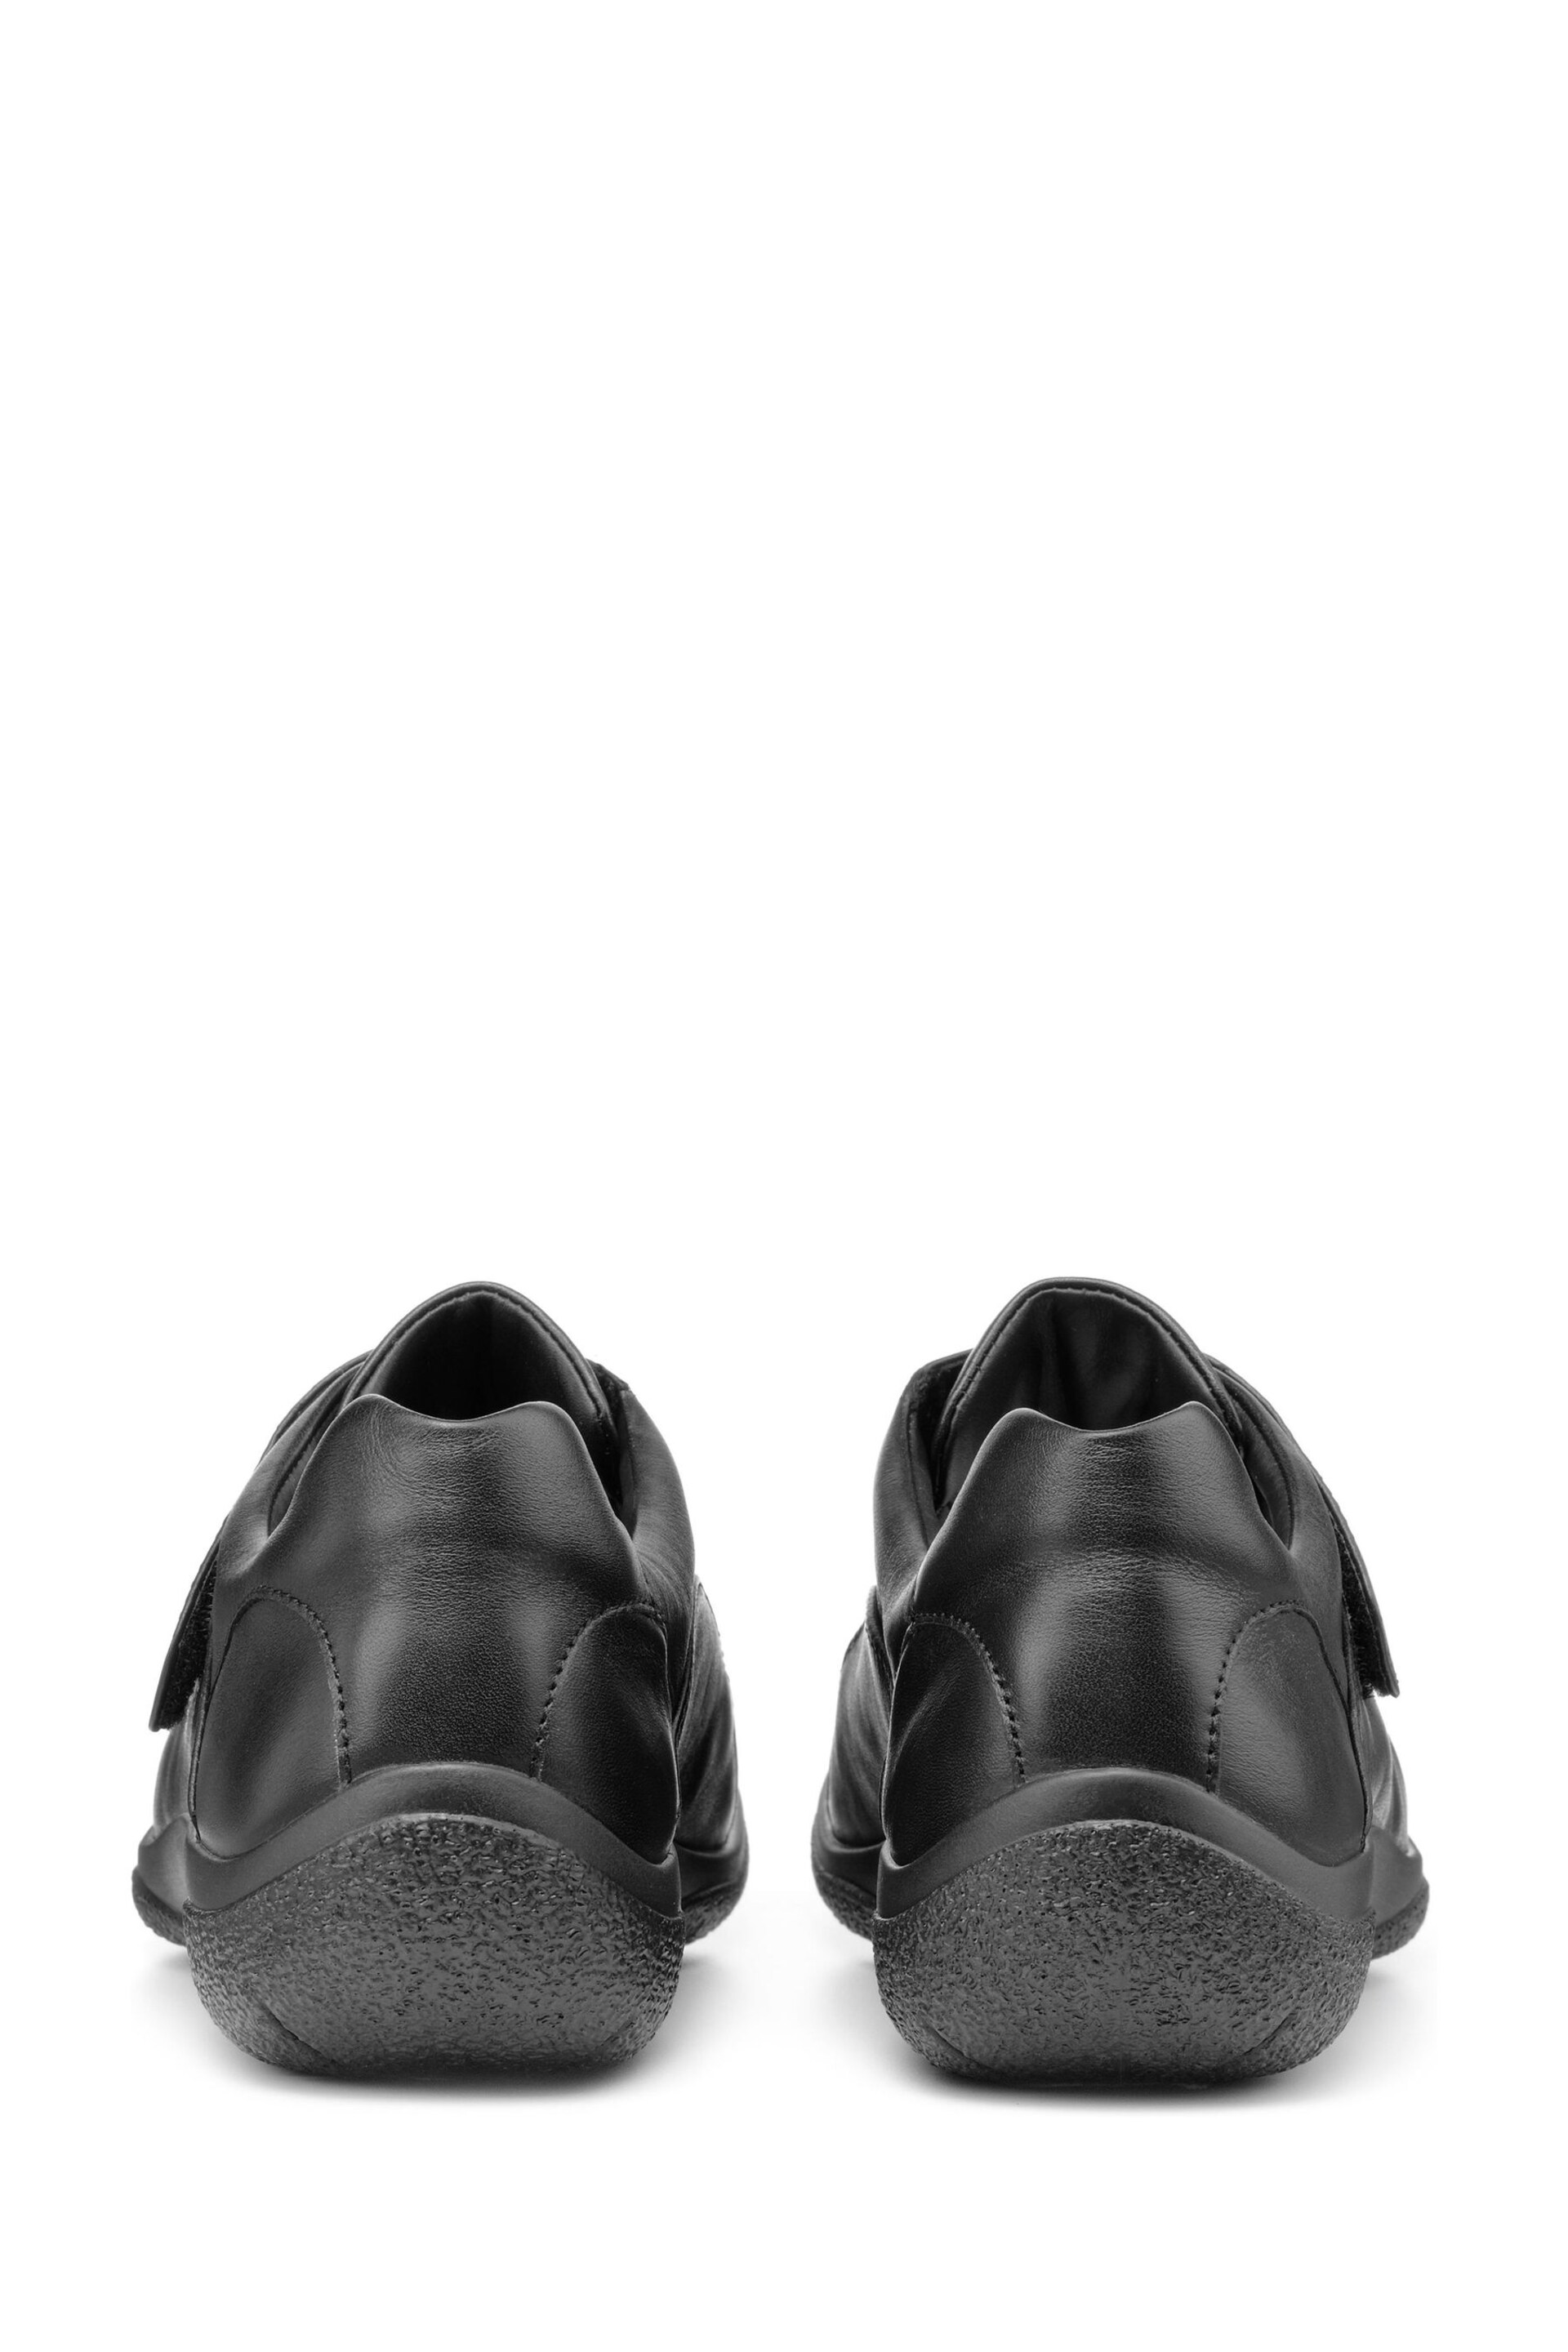 Hotter Sugar II Wide Fit Touch Fastening Black Shoes - Image 3 of 4